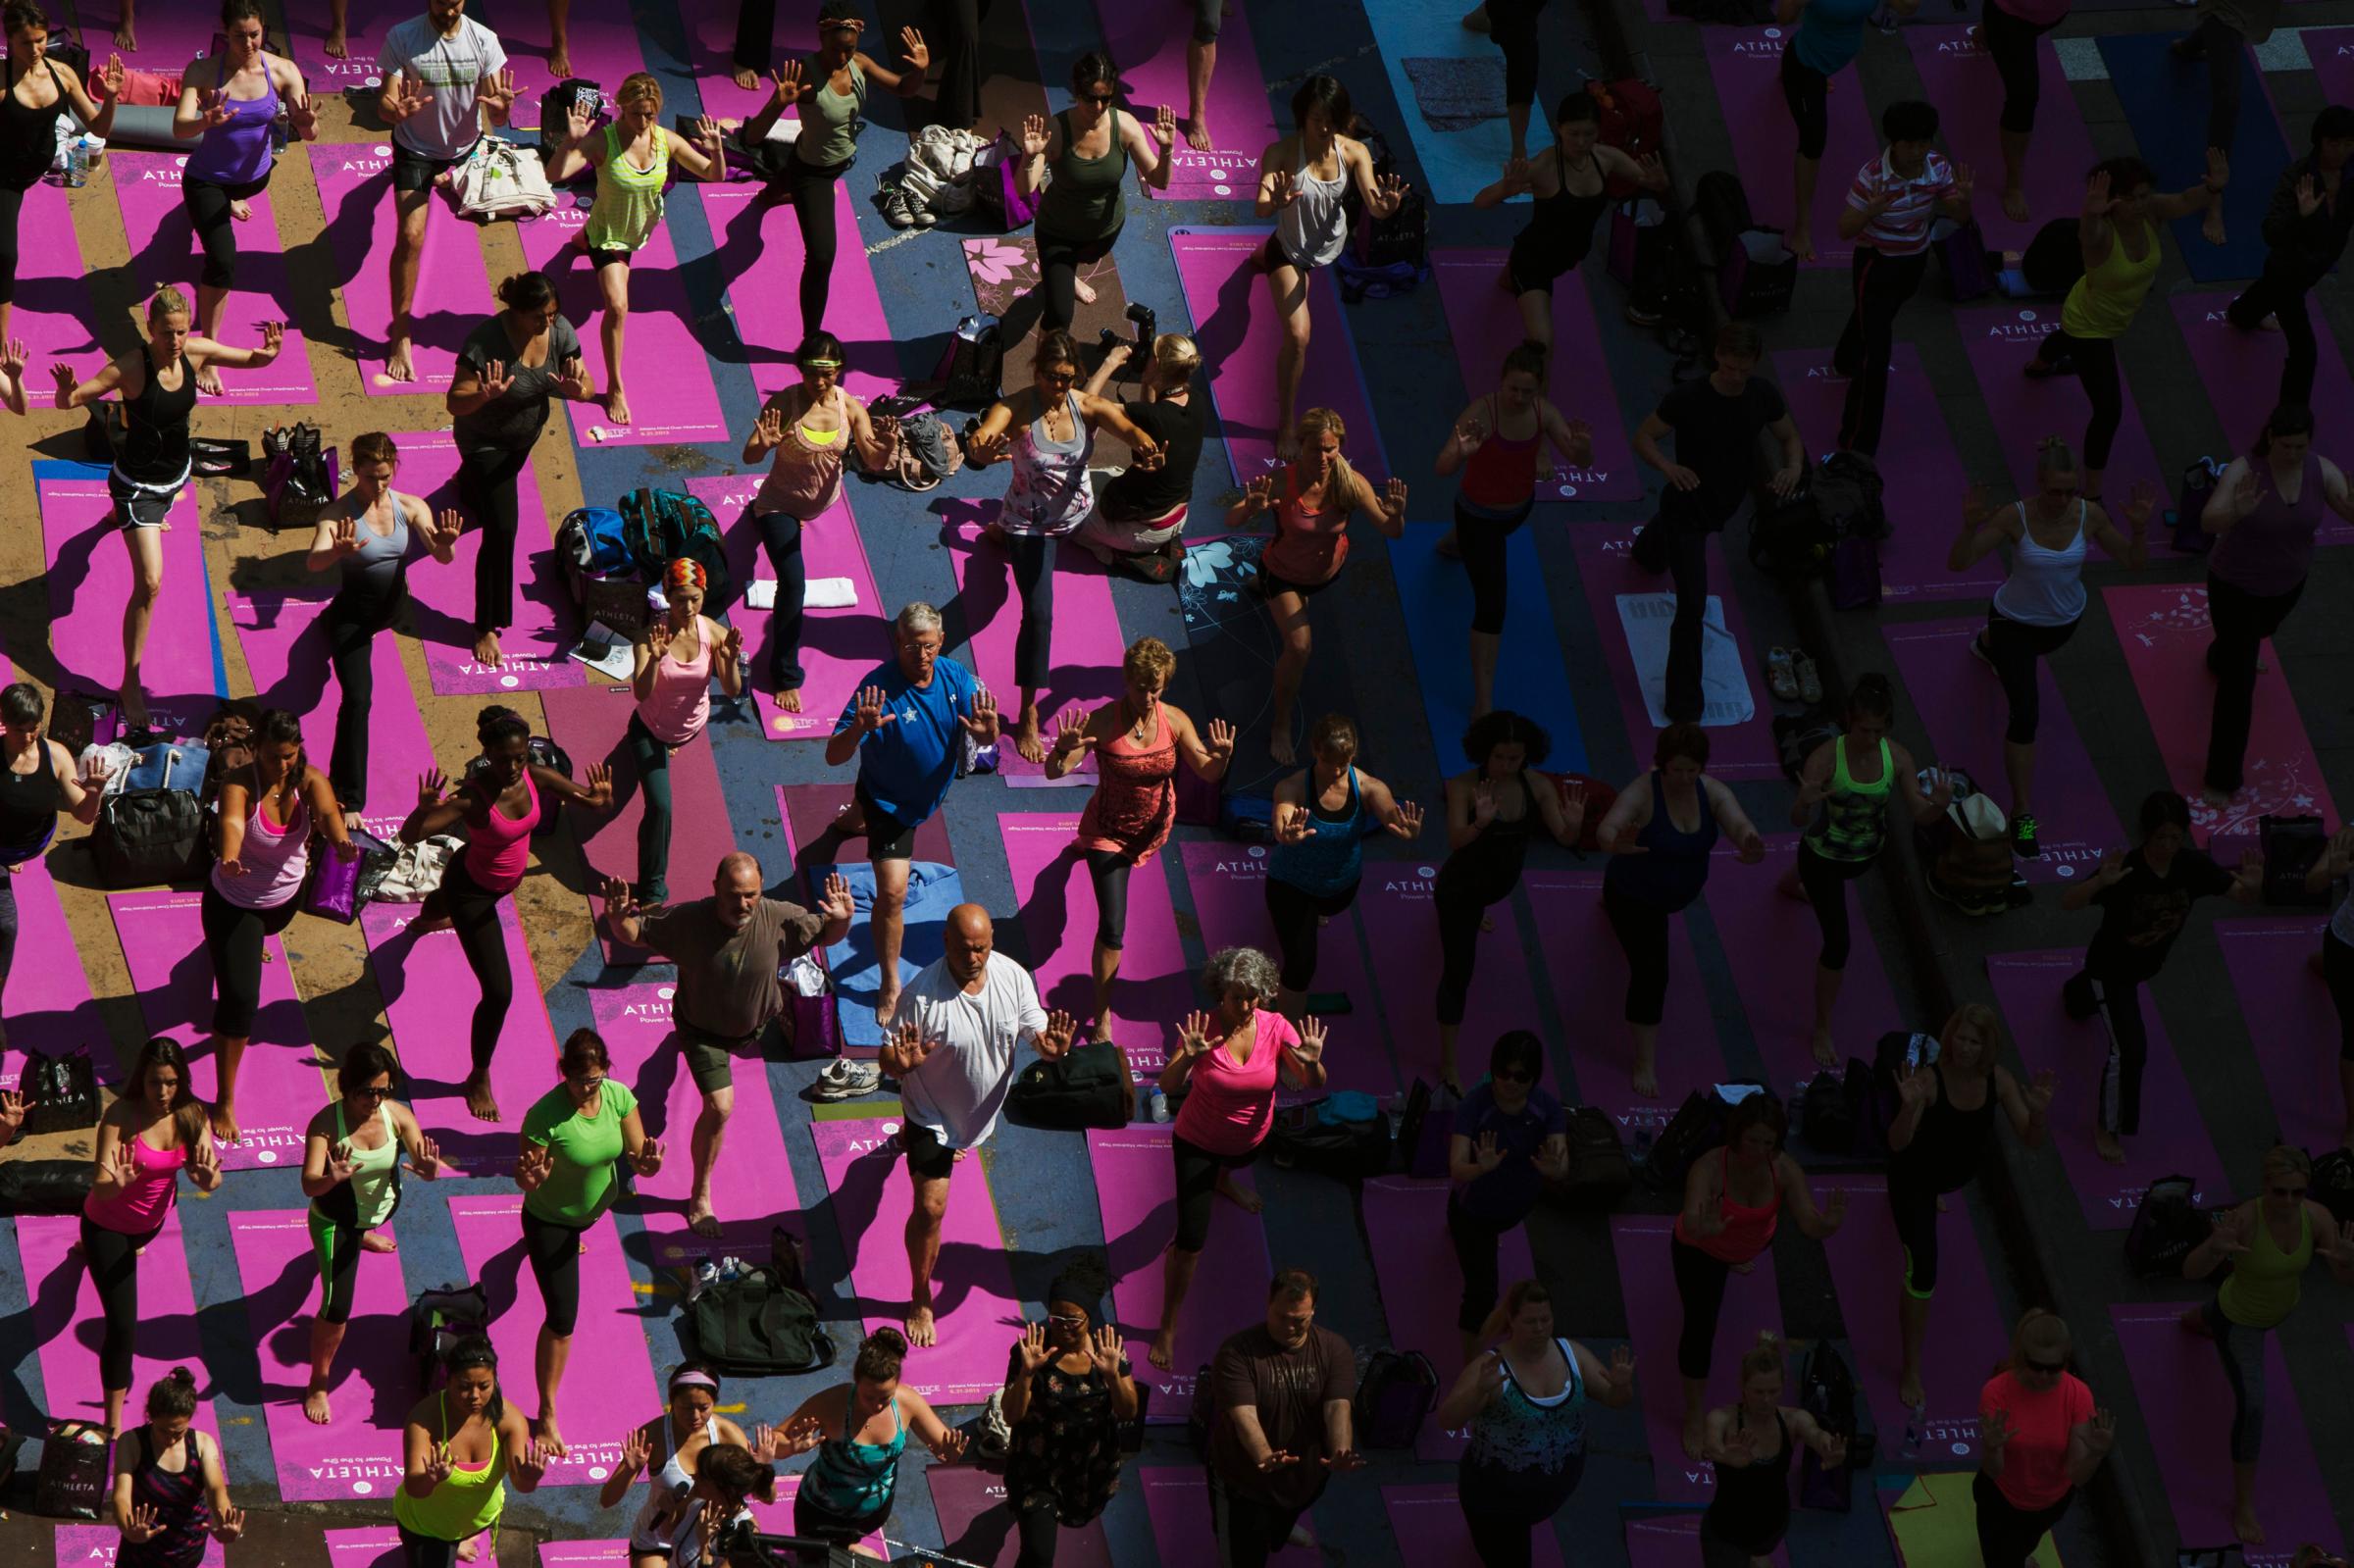 People take part in a group yoga practice on the morning of the summer solstice in New York's Times Square